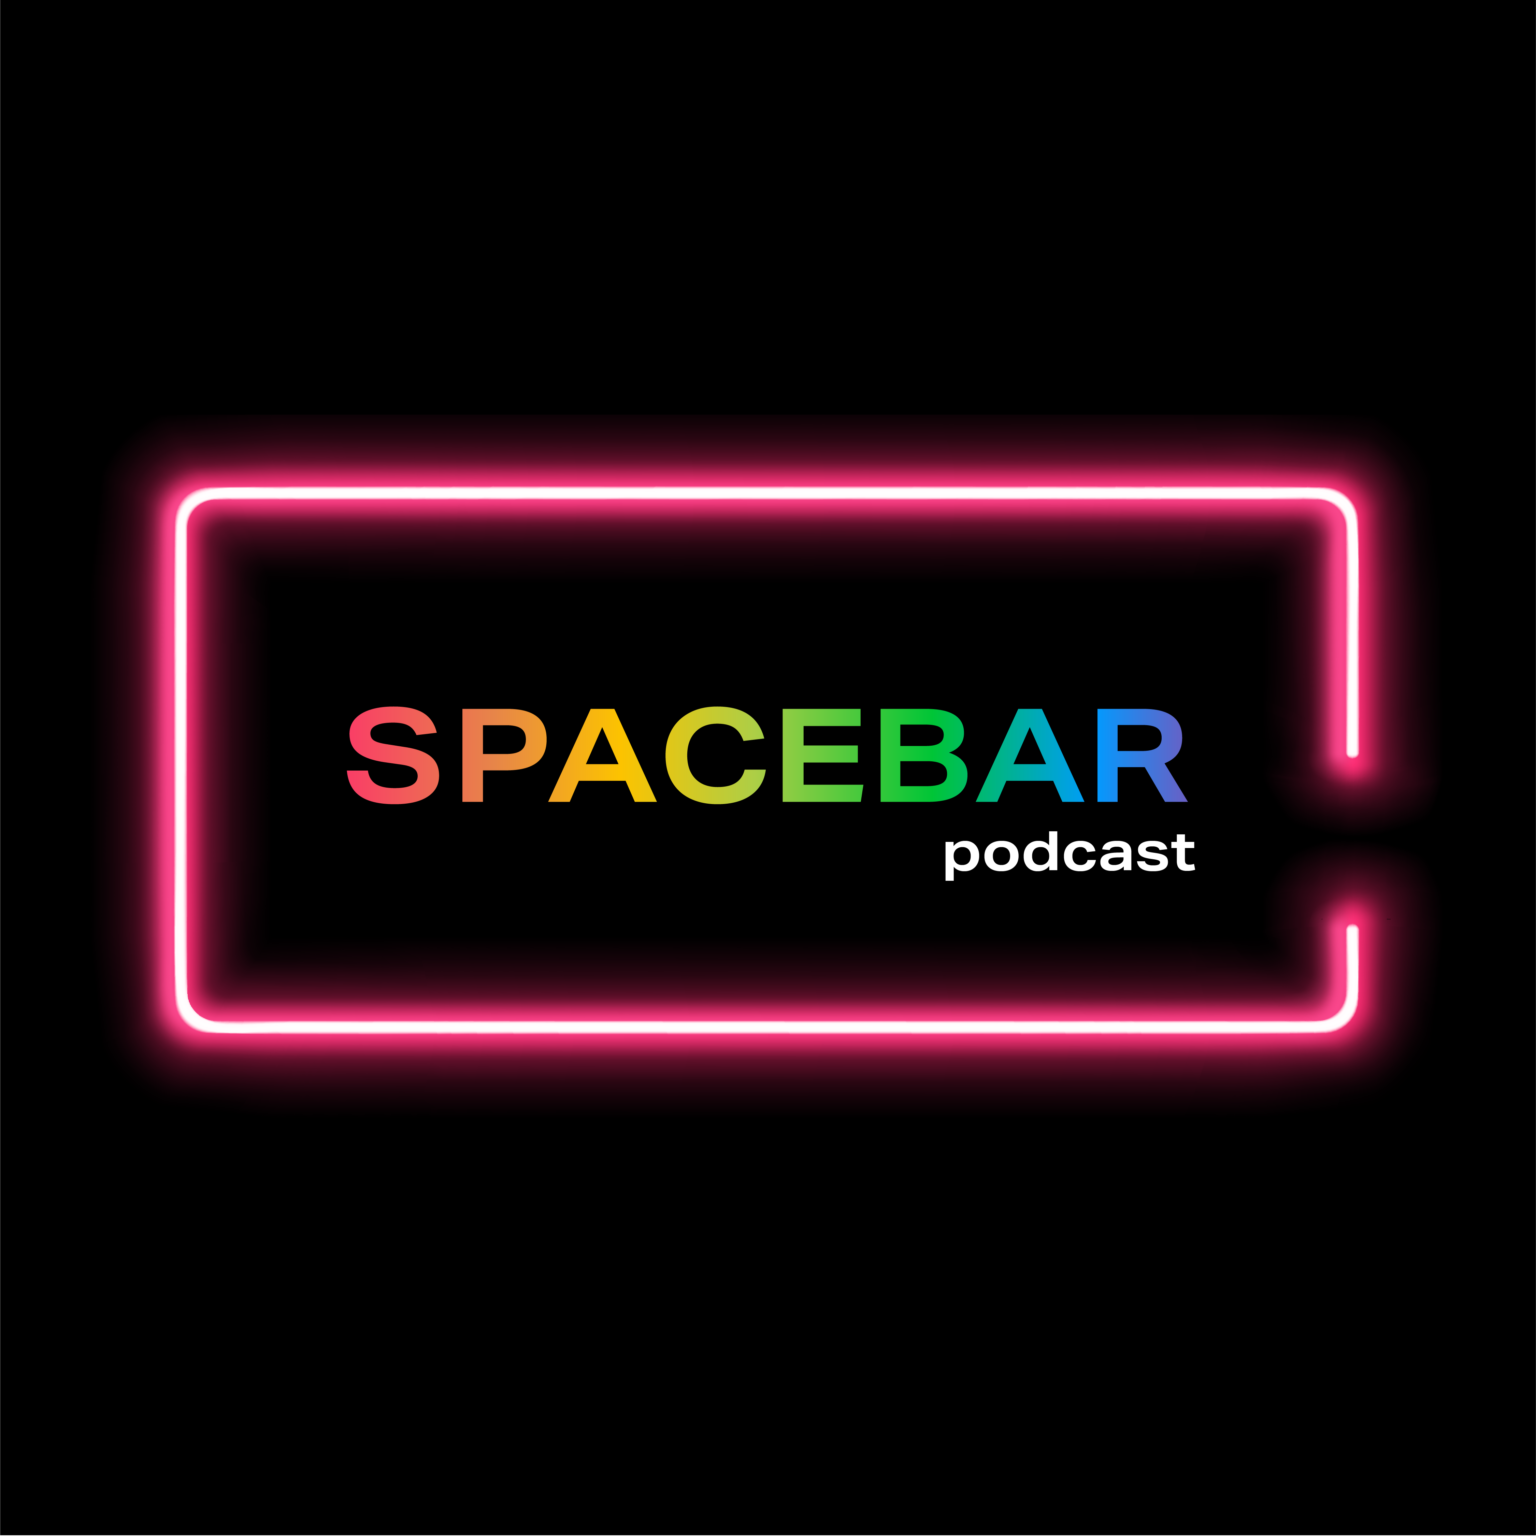 The Space Bar podcast is an ecommerce podcast from Space 48, logo